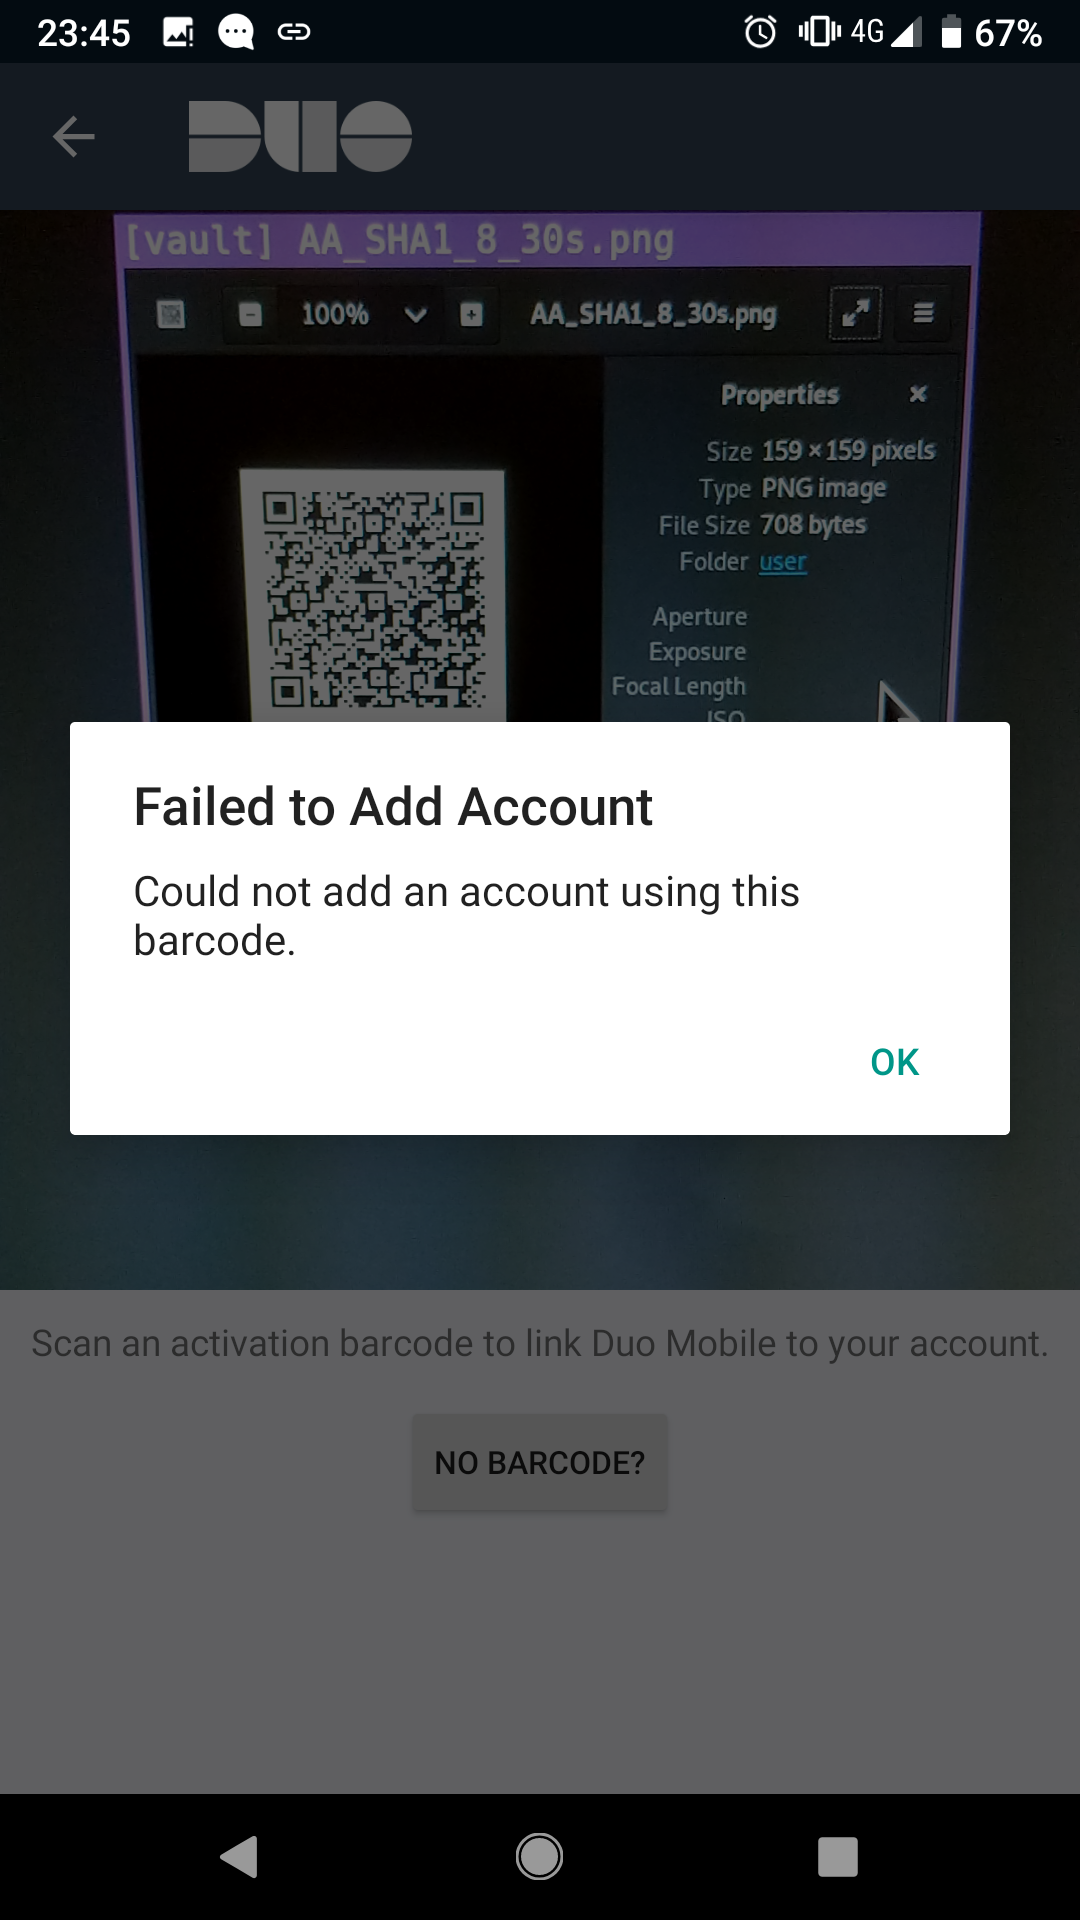 Failed to Add Account - Could not add an account using this barcode.